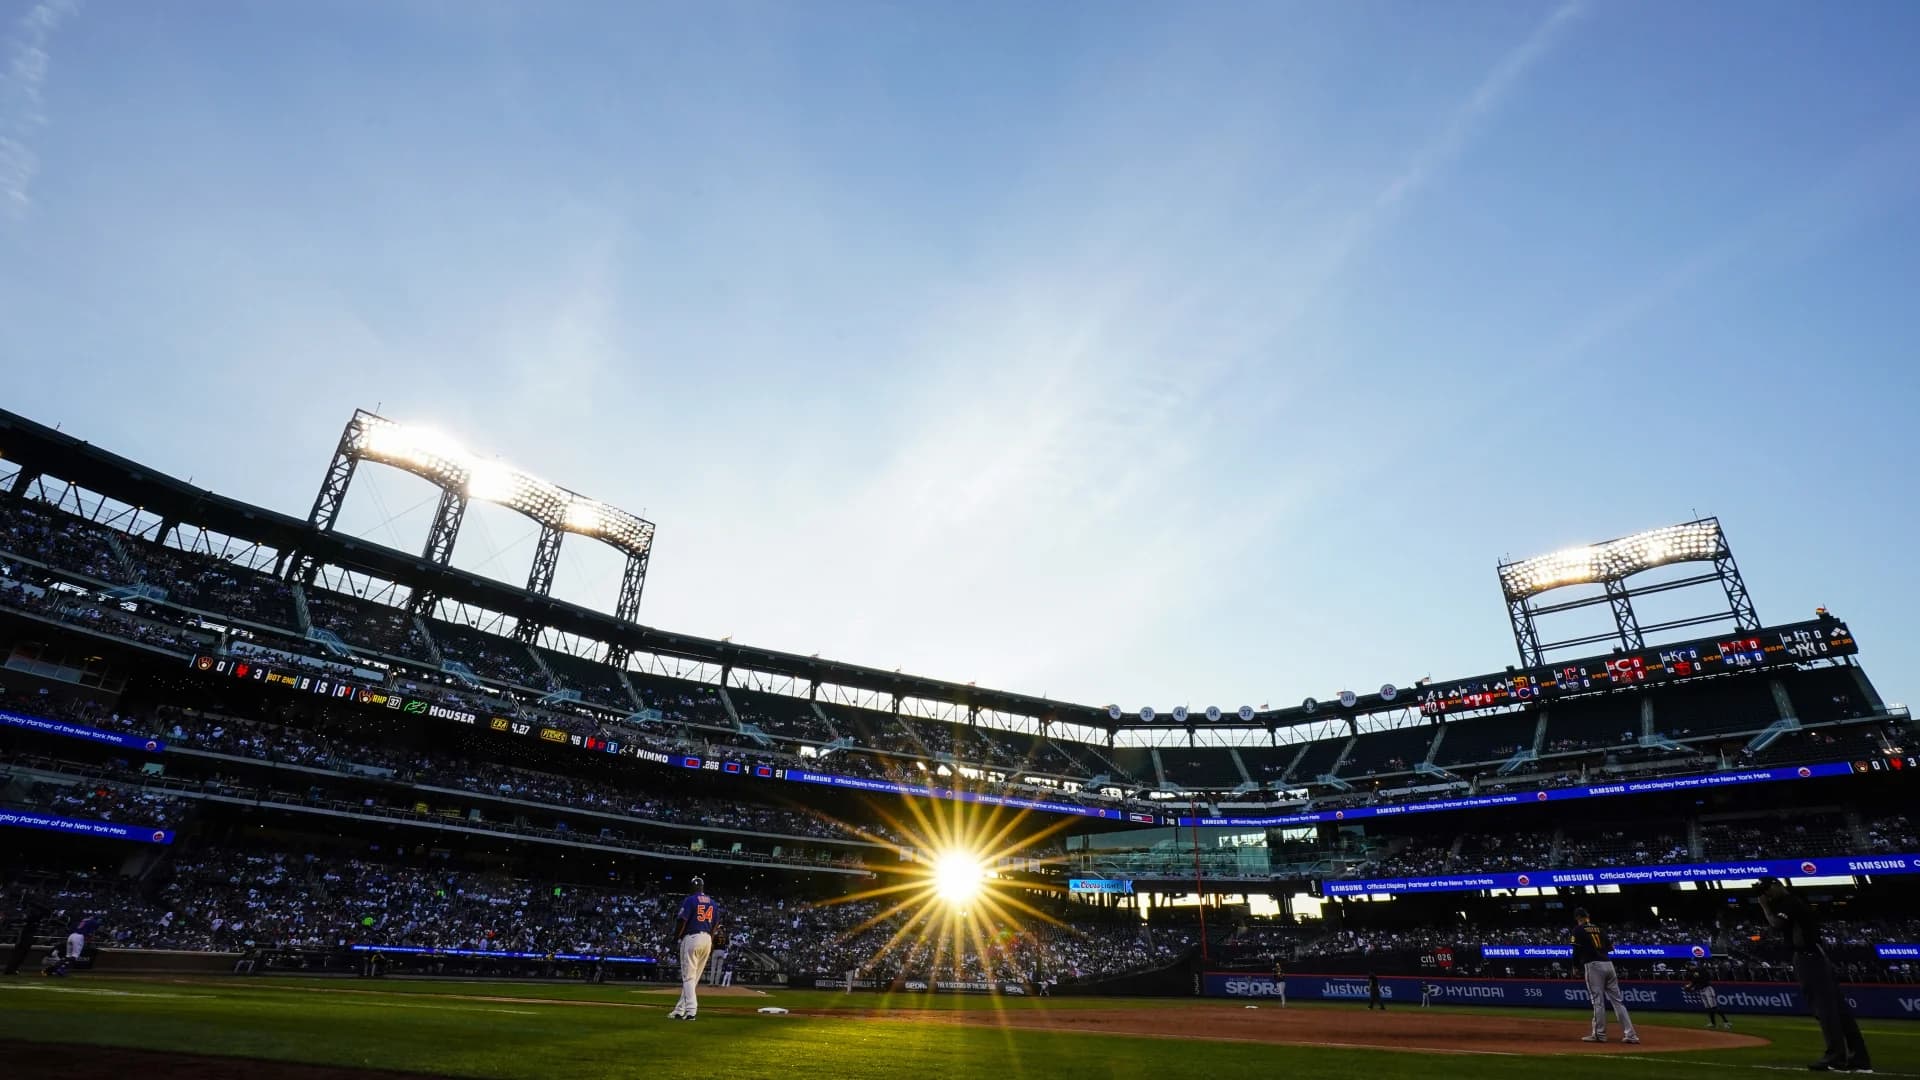 Mets, minor leaguers plan meeting to discuss pay, conditions